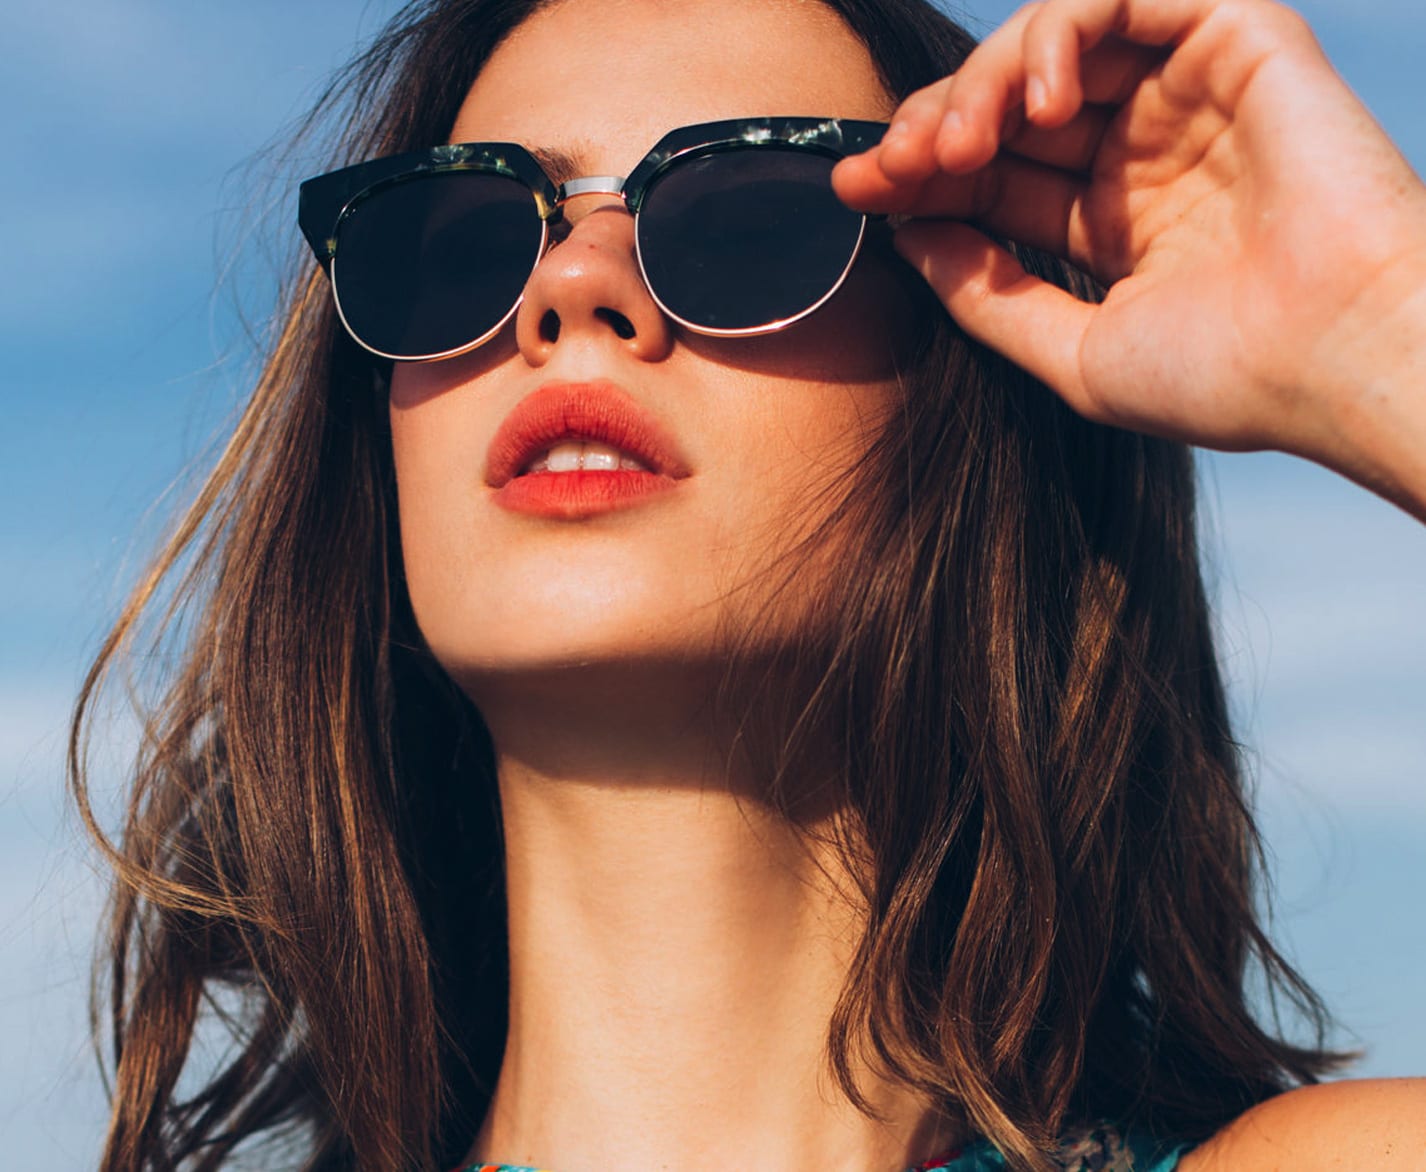 4 Classic Eyewear Styles and How To Wear Them| Cohen's Fashion Optical